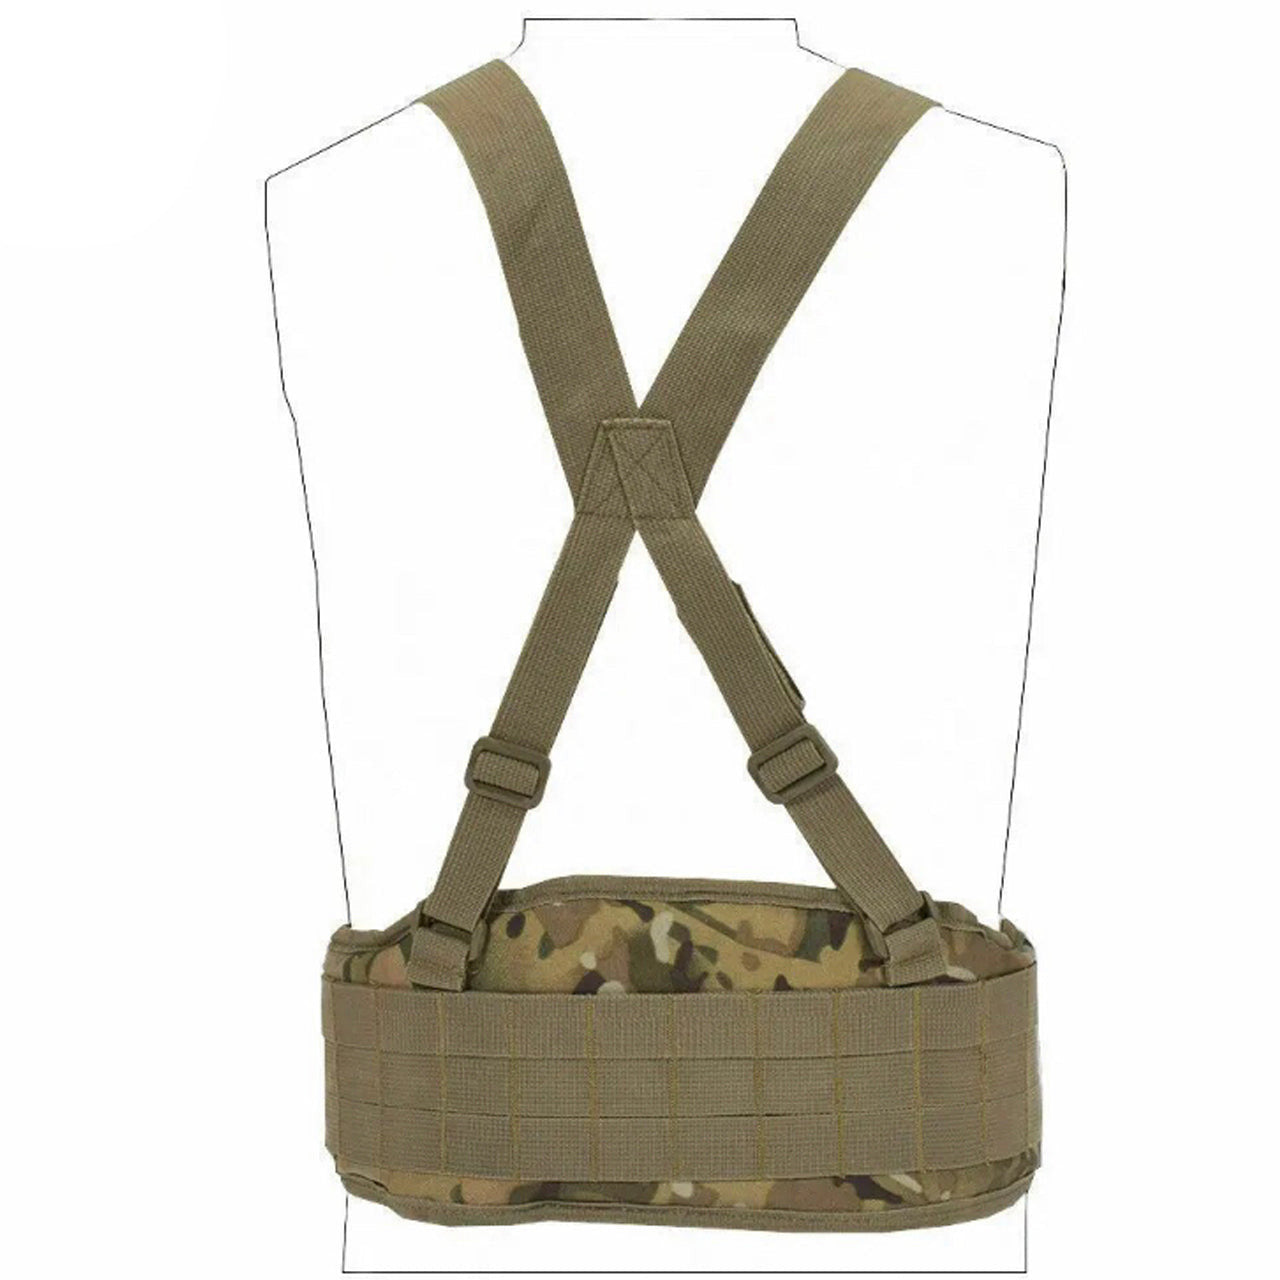 Boasting three rows of MOLLE-designed webbing straps for easy pouch attachment, the Cross Harness Platform is a lightweight, low-profile option with adjustable waist straps (34-64 inches) and easy-release, high-quality buckles. Multicam rear colour www.defenceqstore.com.au